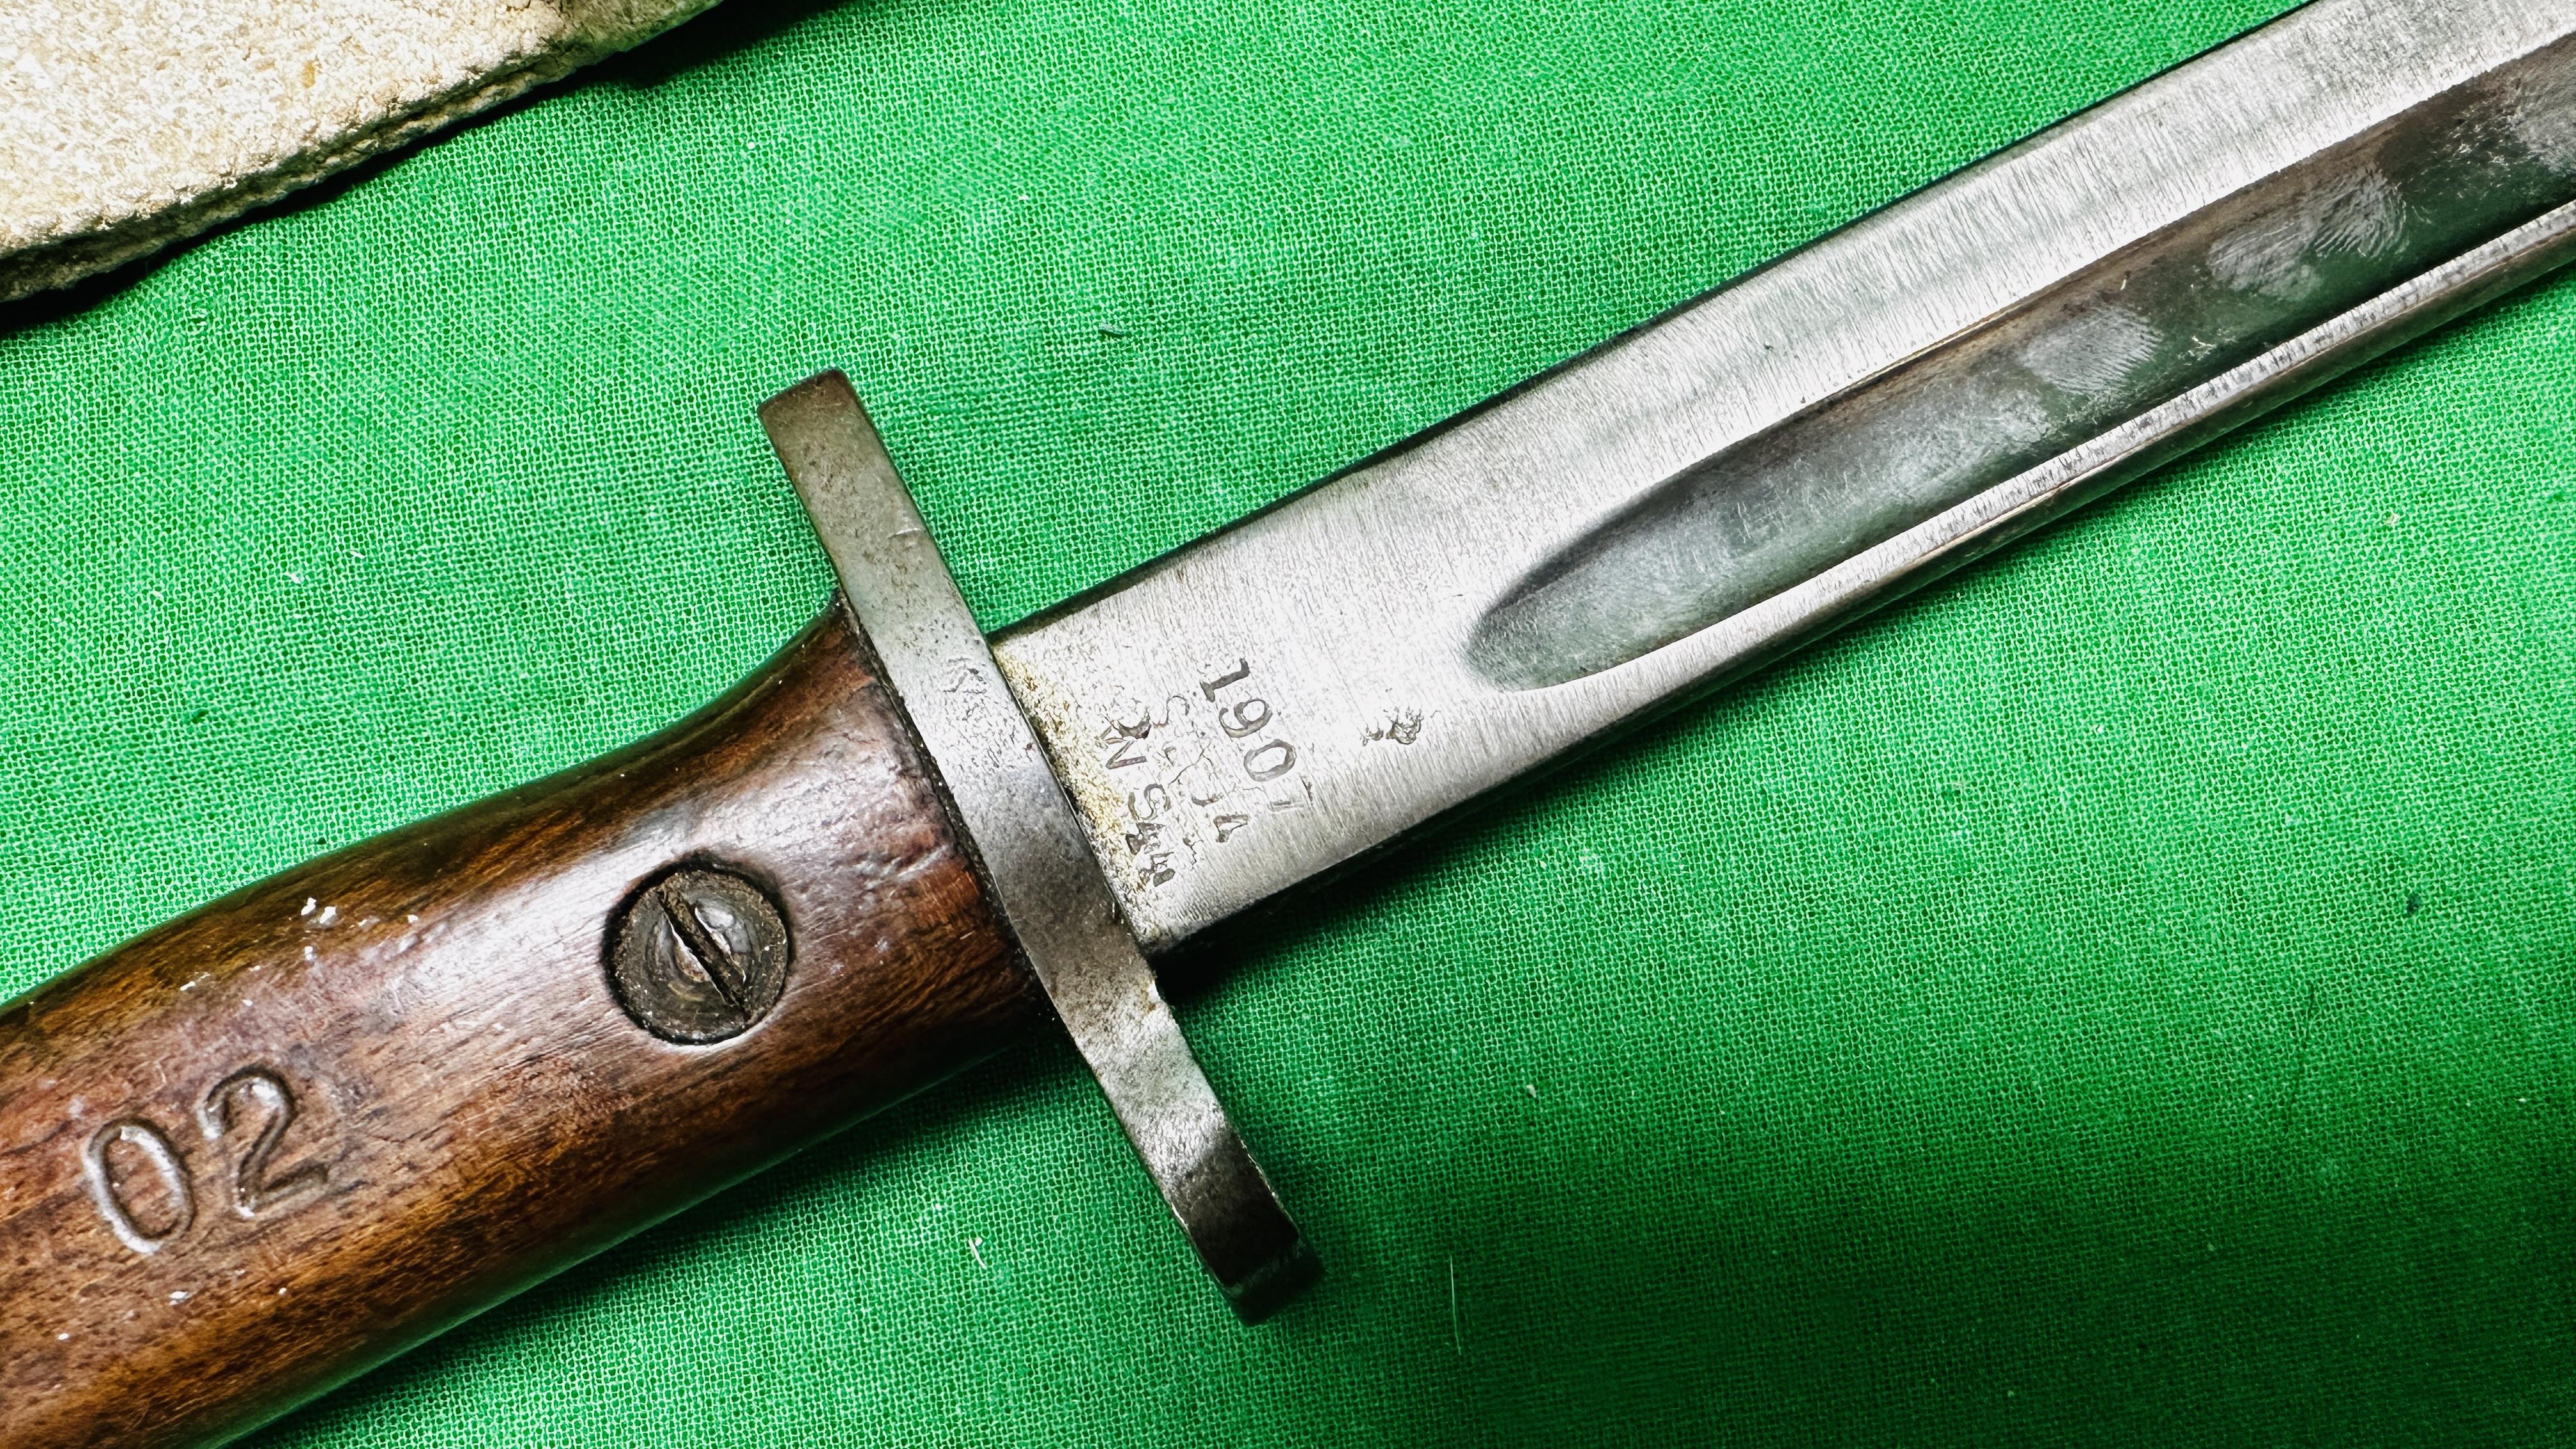 BRITISH 1907 BAYONET WITH SCABBARD ALONG WITH SNAIL BRAND CRATE HAMMER - NO POSTAGE OR PACKING - Bild 7 aus 15